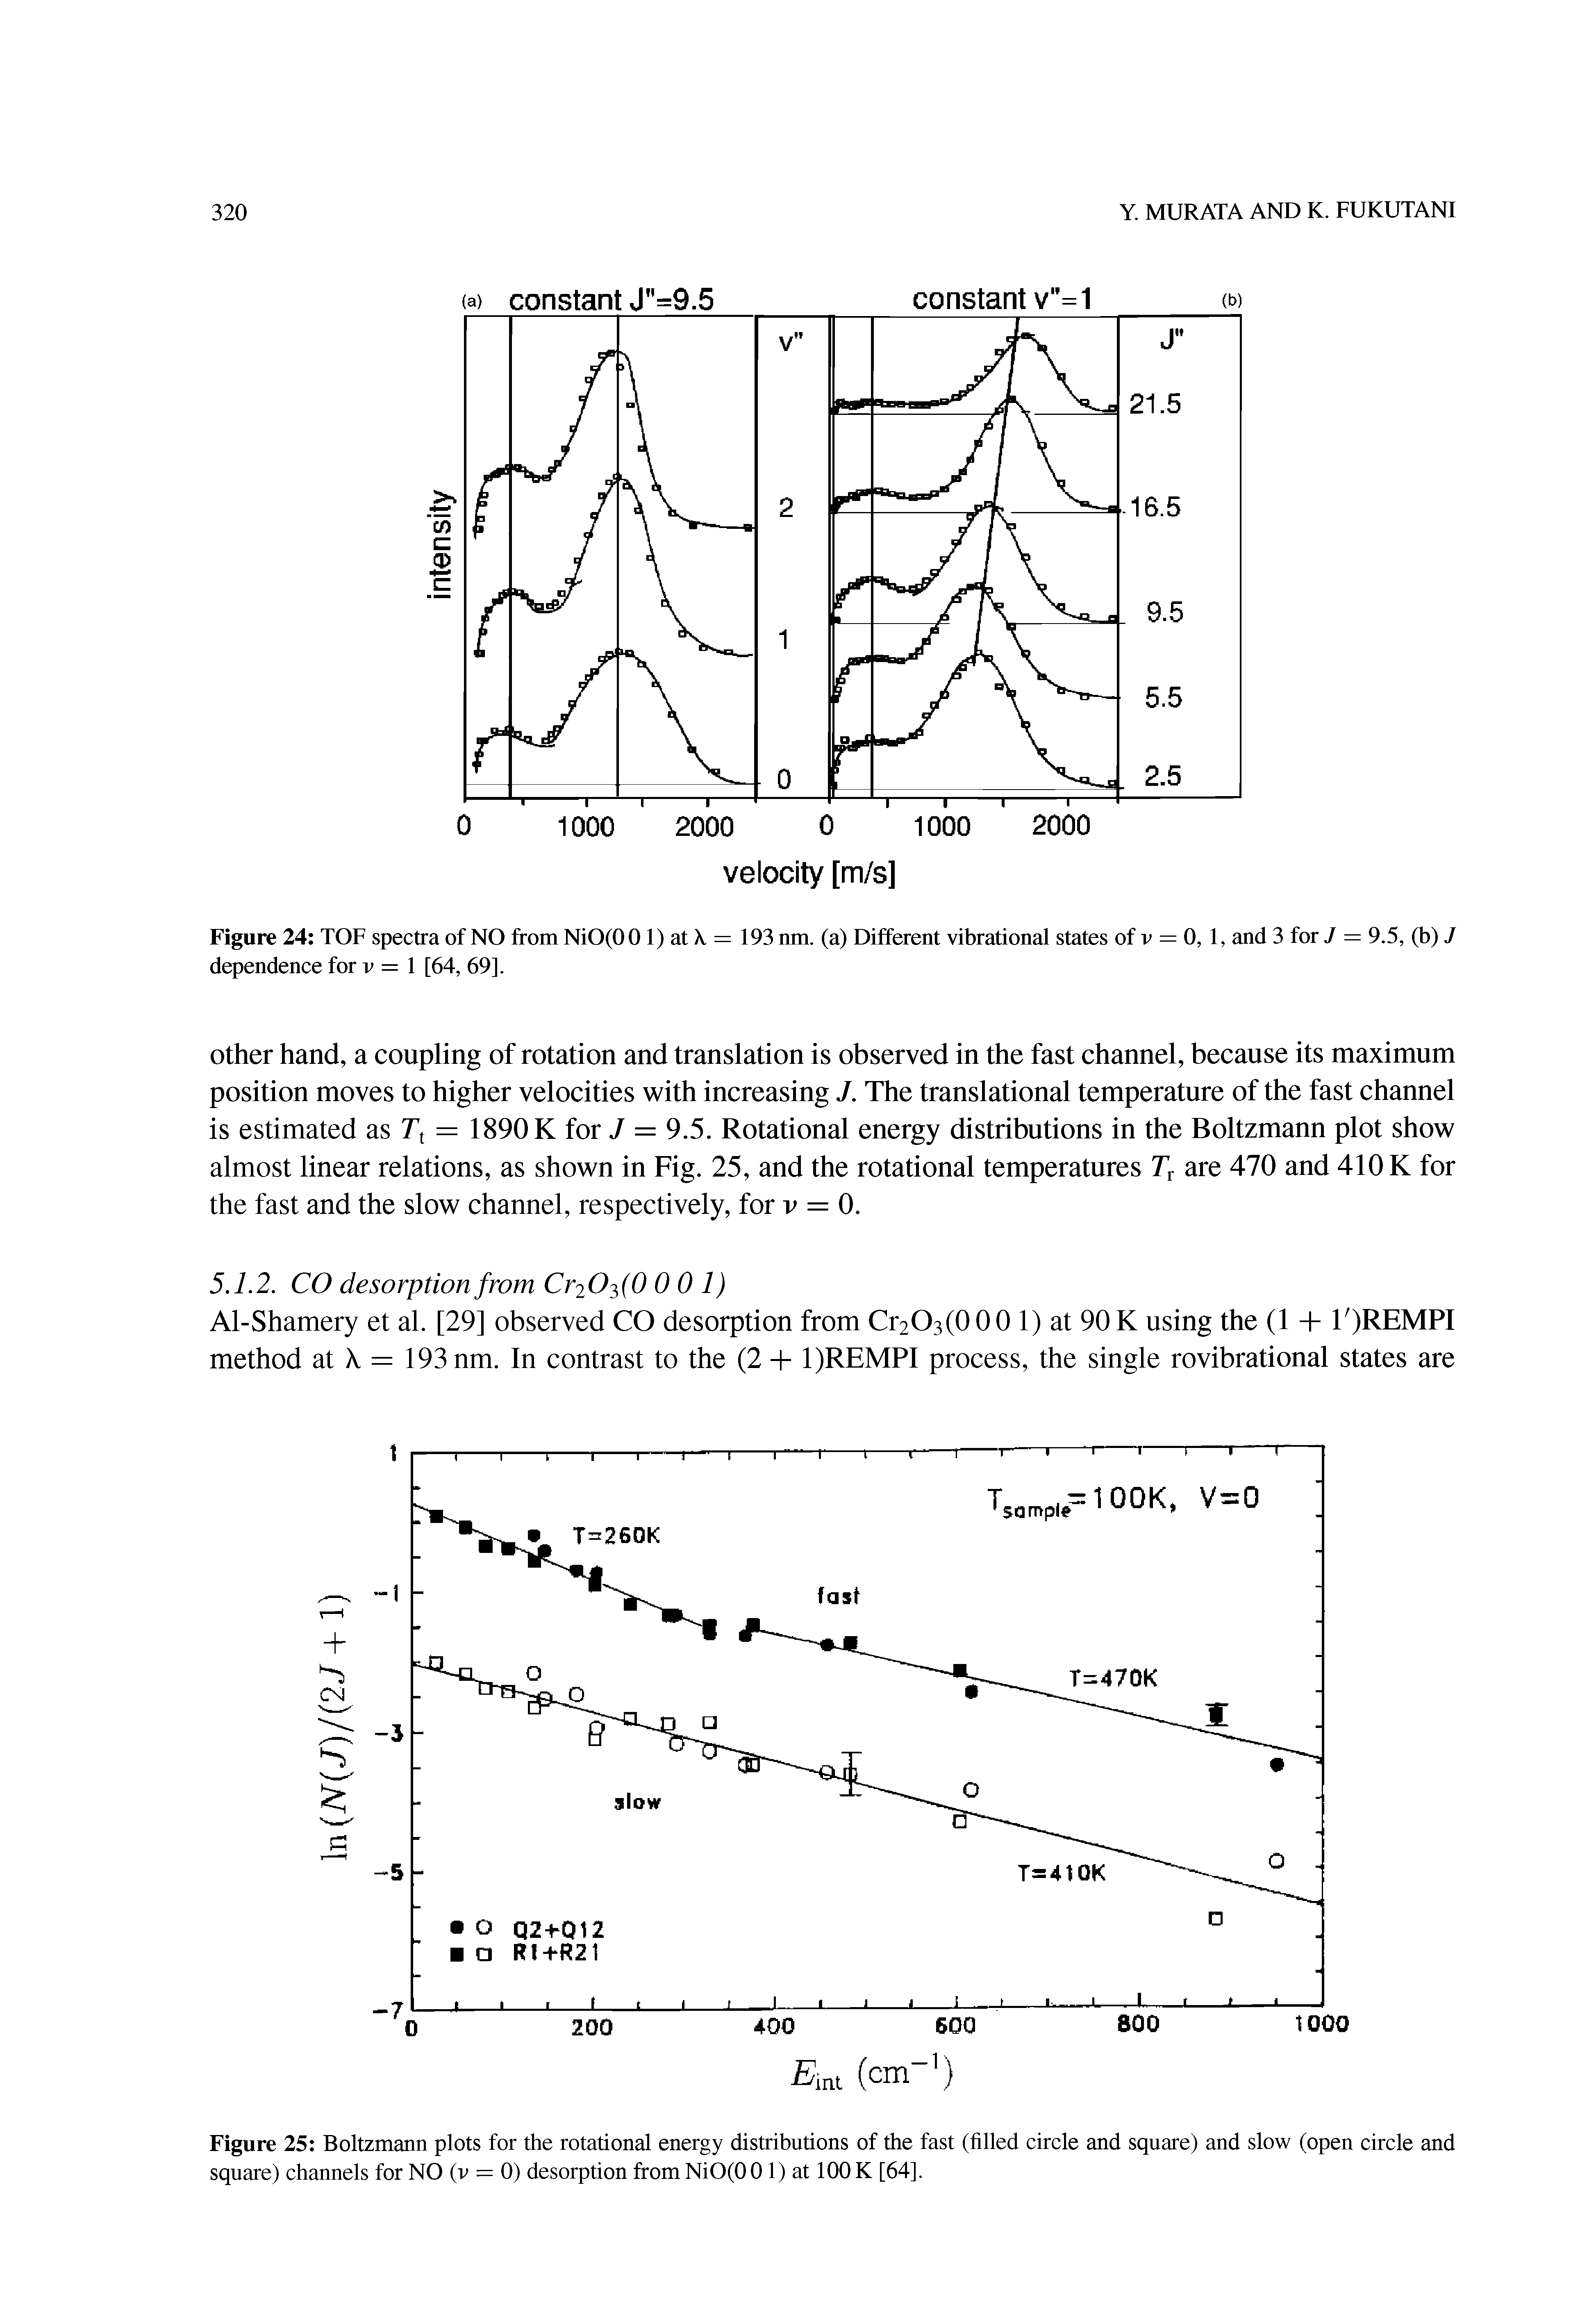 Figure 25 Boltzmann plots for the rotational energy distributions of the fast (filled circle and square) and slow (open circle and square) channels for NO (v = 0) desorption from NiO(0 01) at 100 K [64],...